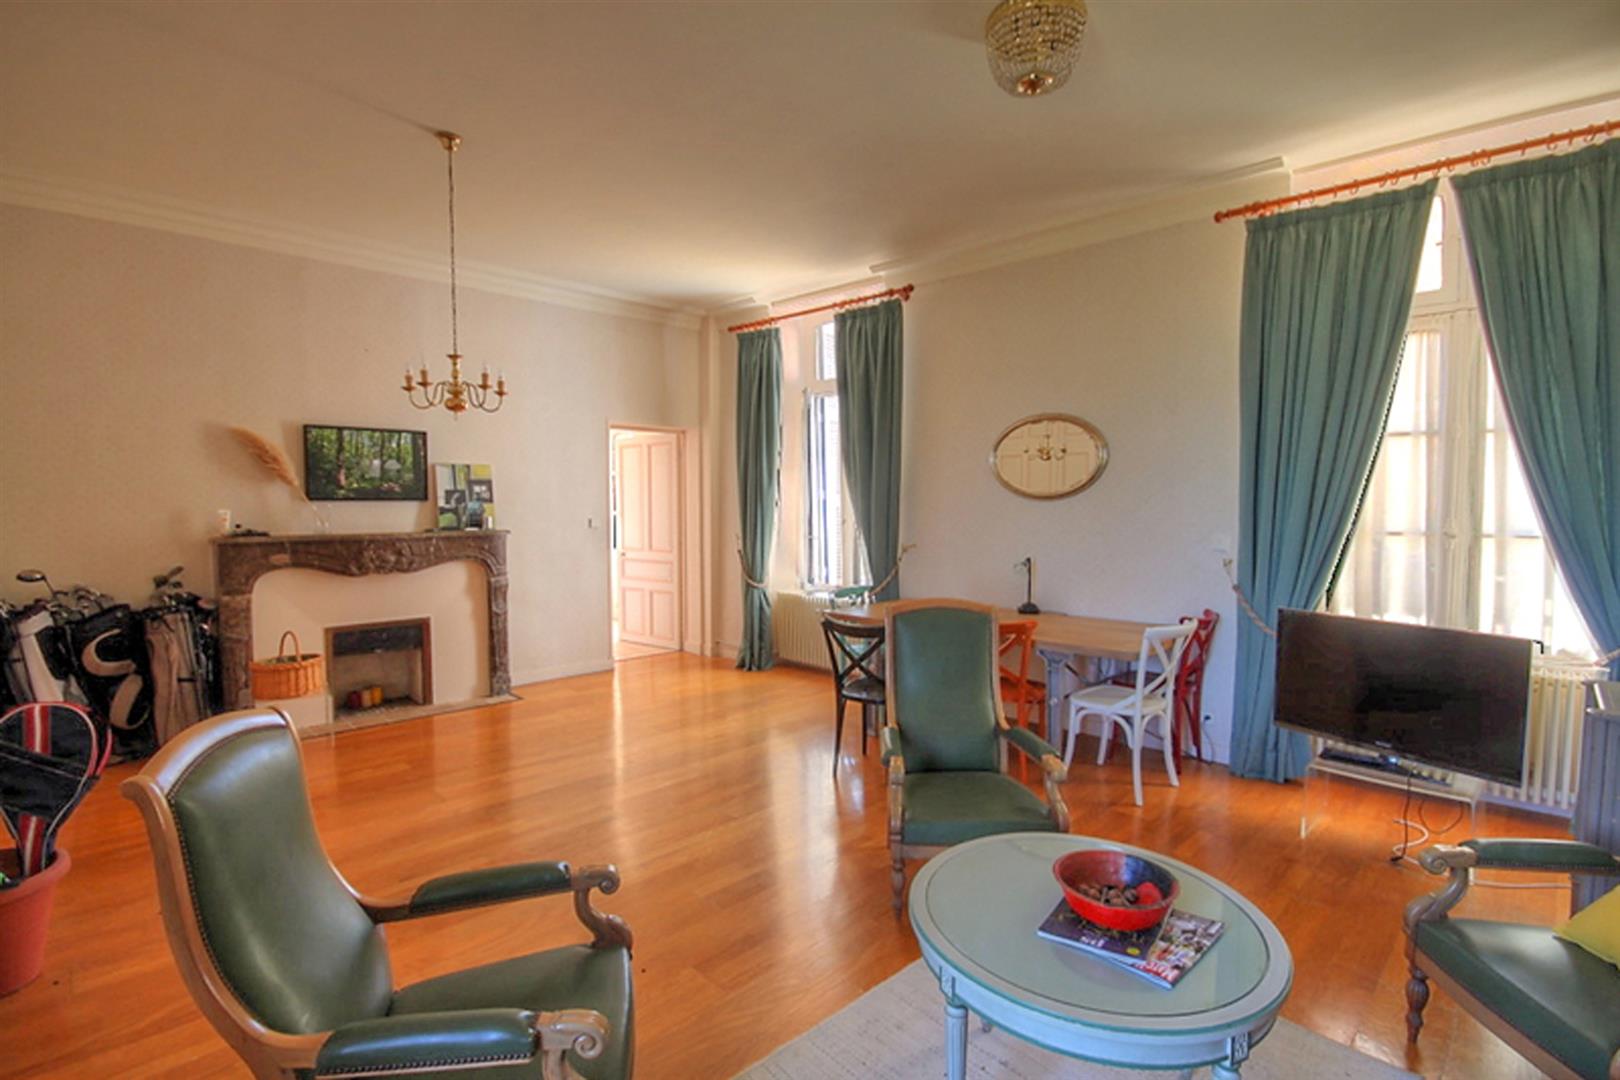 1 bed château apartment, pool & park of 8 hectares, adjacent golf course